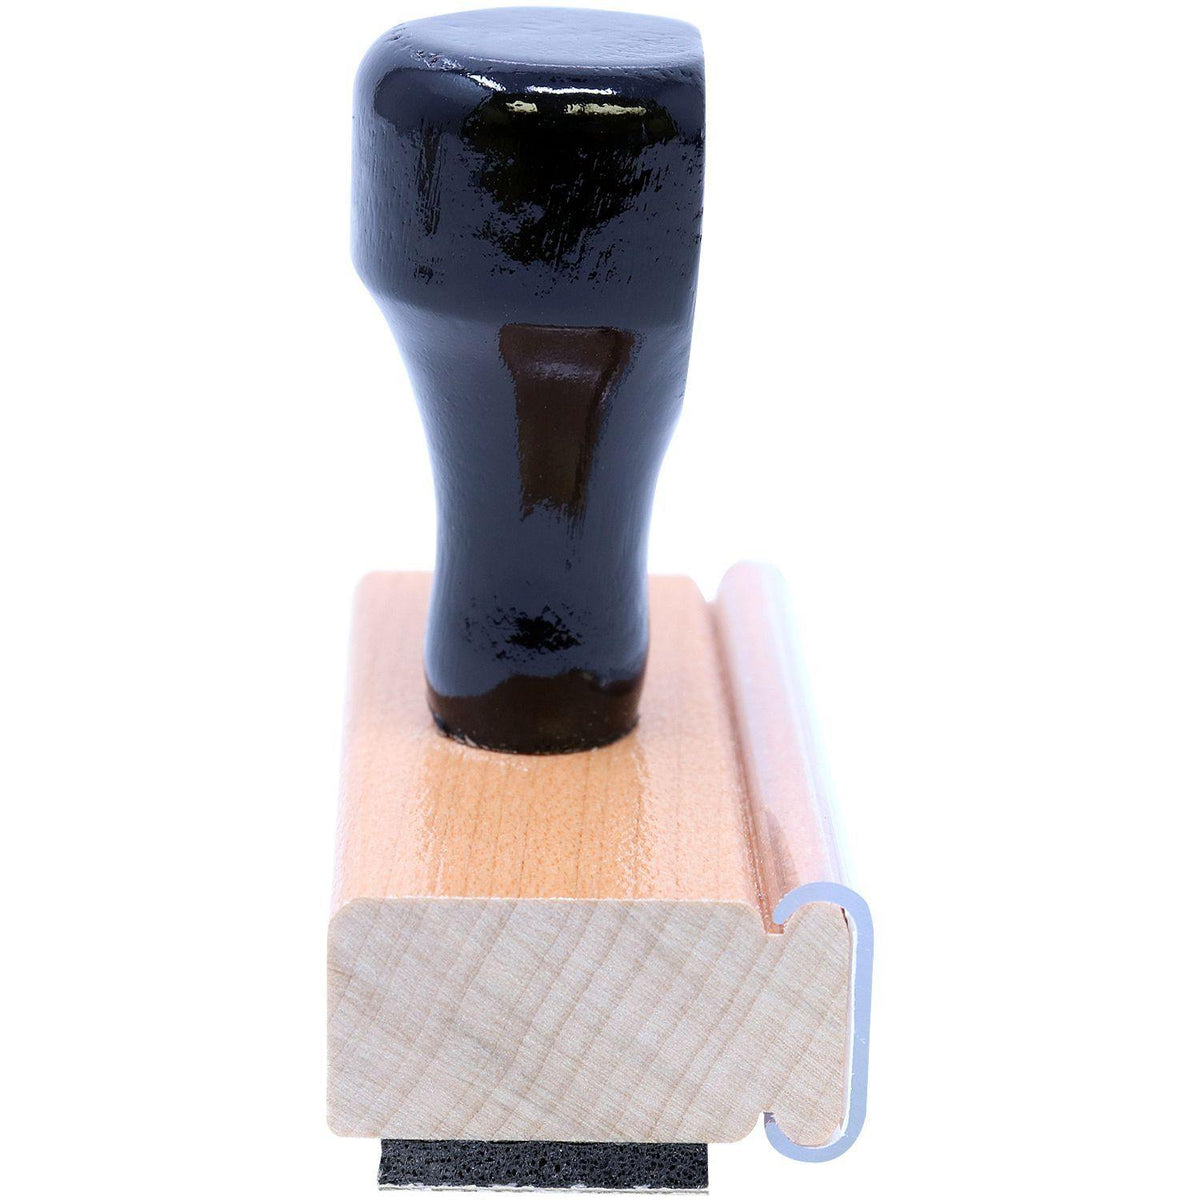 Large Validate Only Rubber Stamp - Engineer Seal Stamps - Brand_Acorn, Impression Size_Large, Stamp Type_Regular Stamp, Type of Use_Office